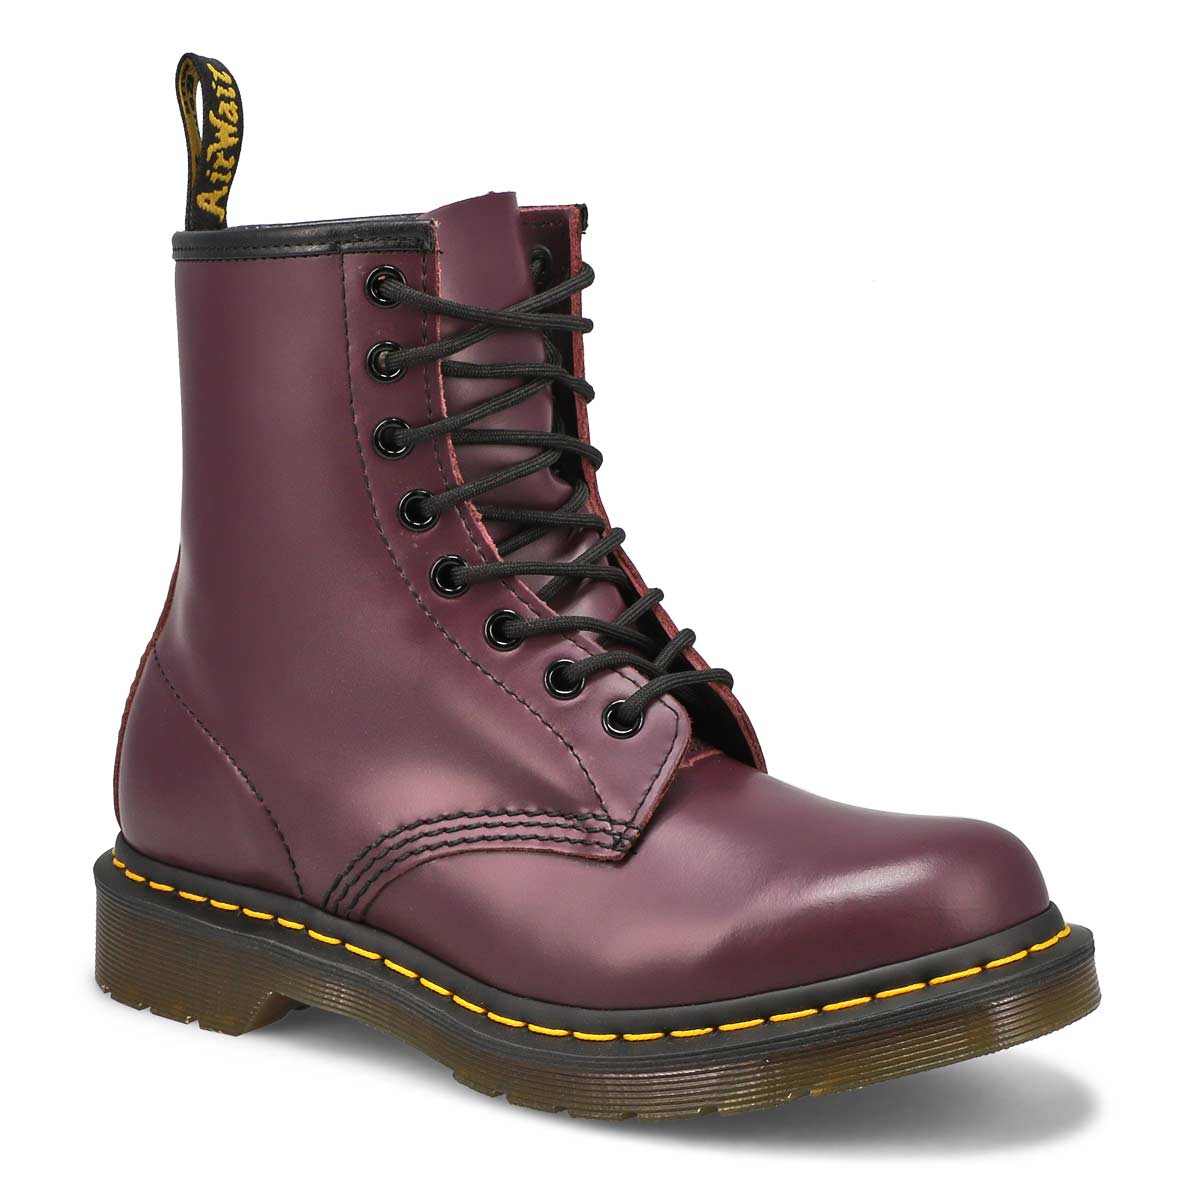 Dr Martens Women's 1460 8-Eye purple smooth leather boots